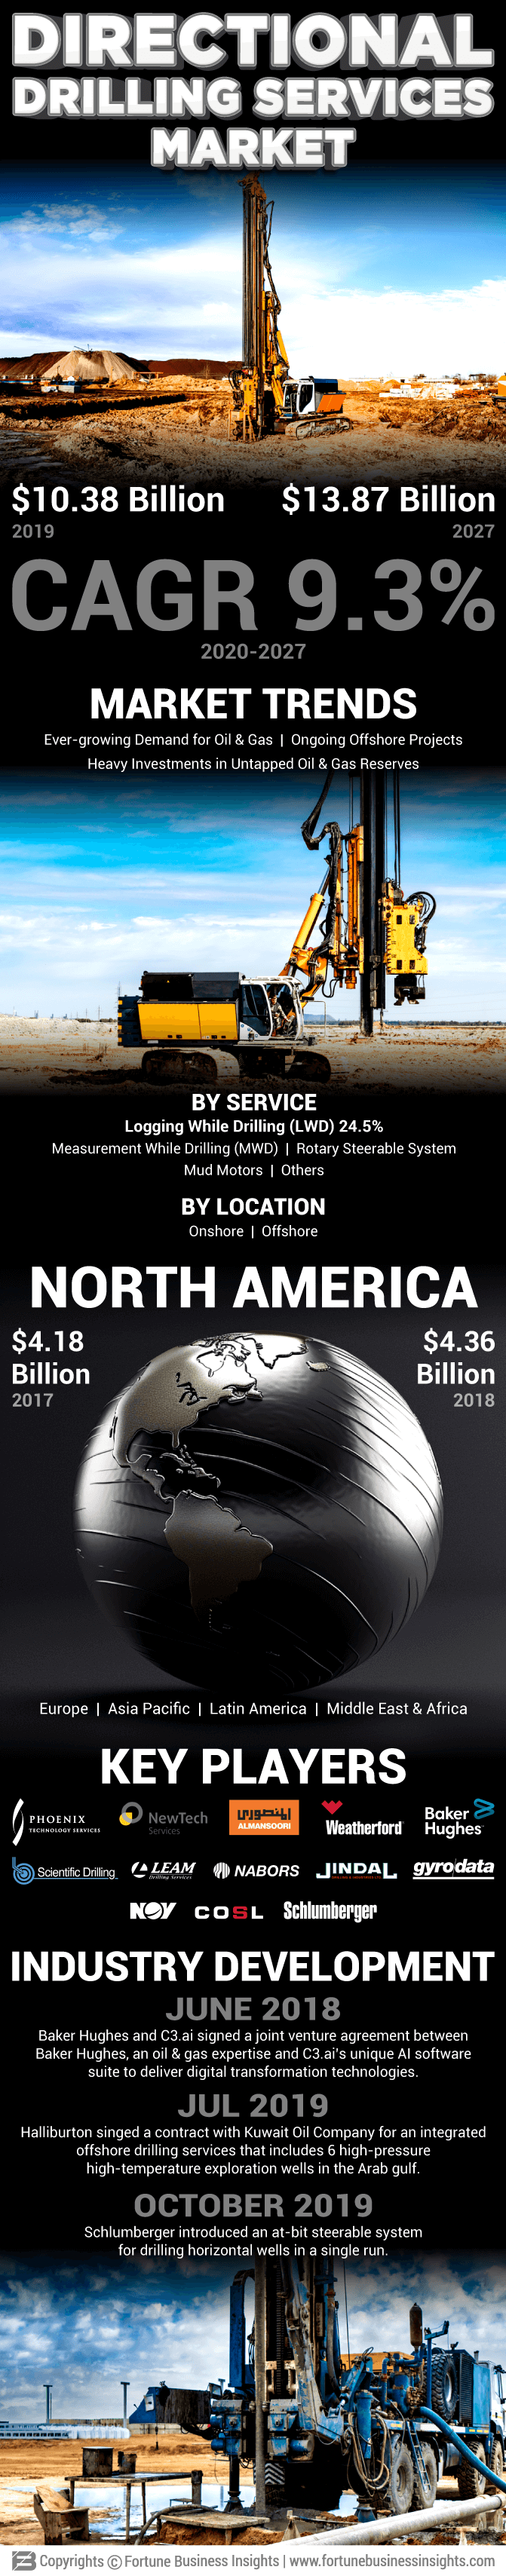 Directional Drilling Services Market 